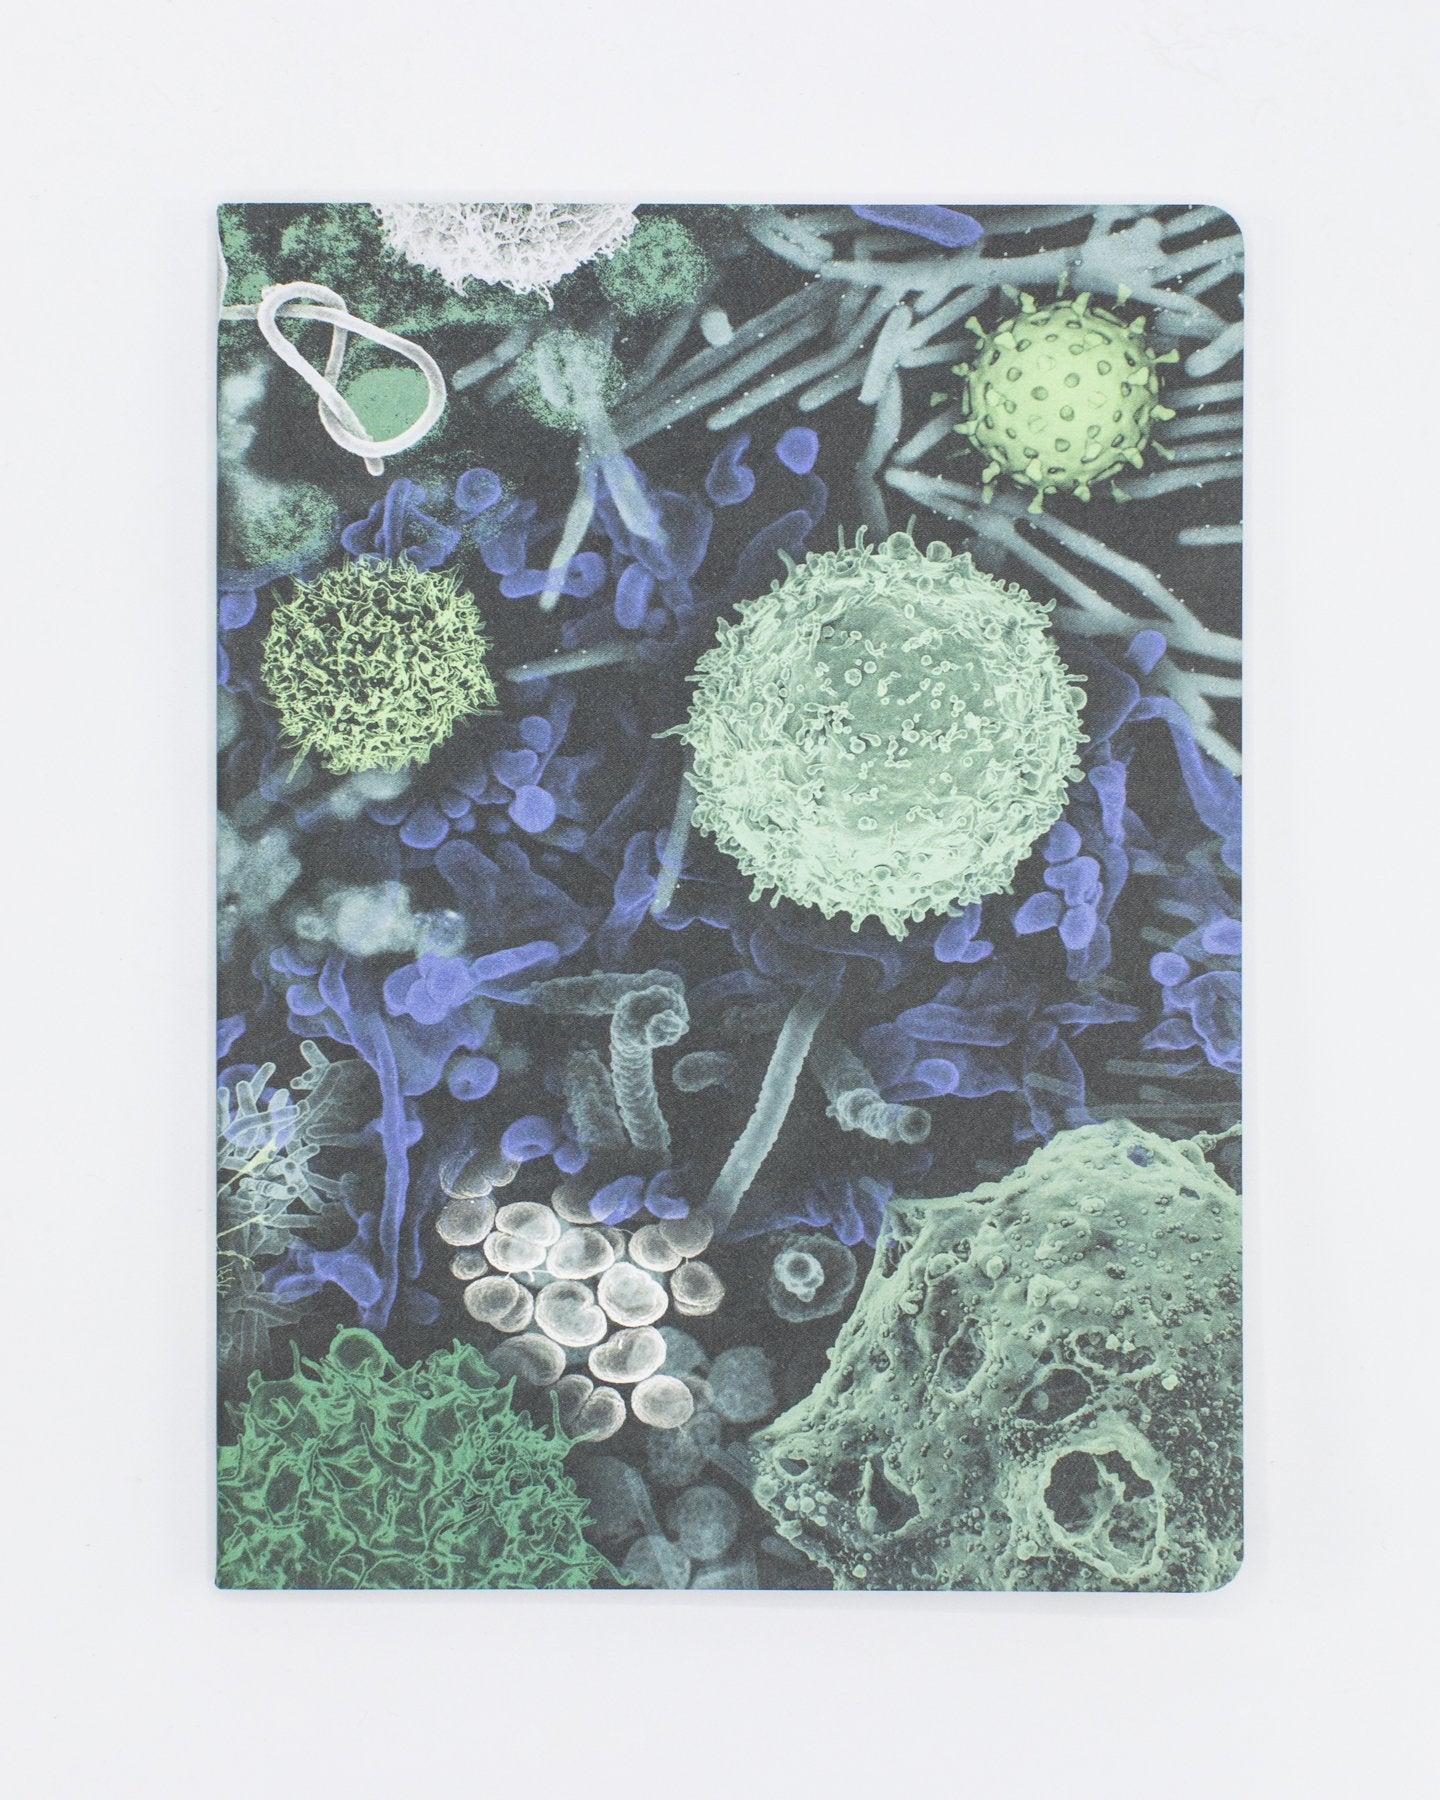 Infectious Disease Softcover Notebook - Lined